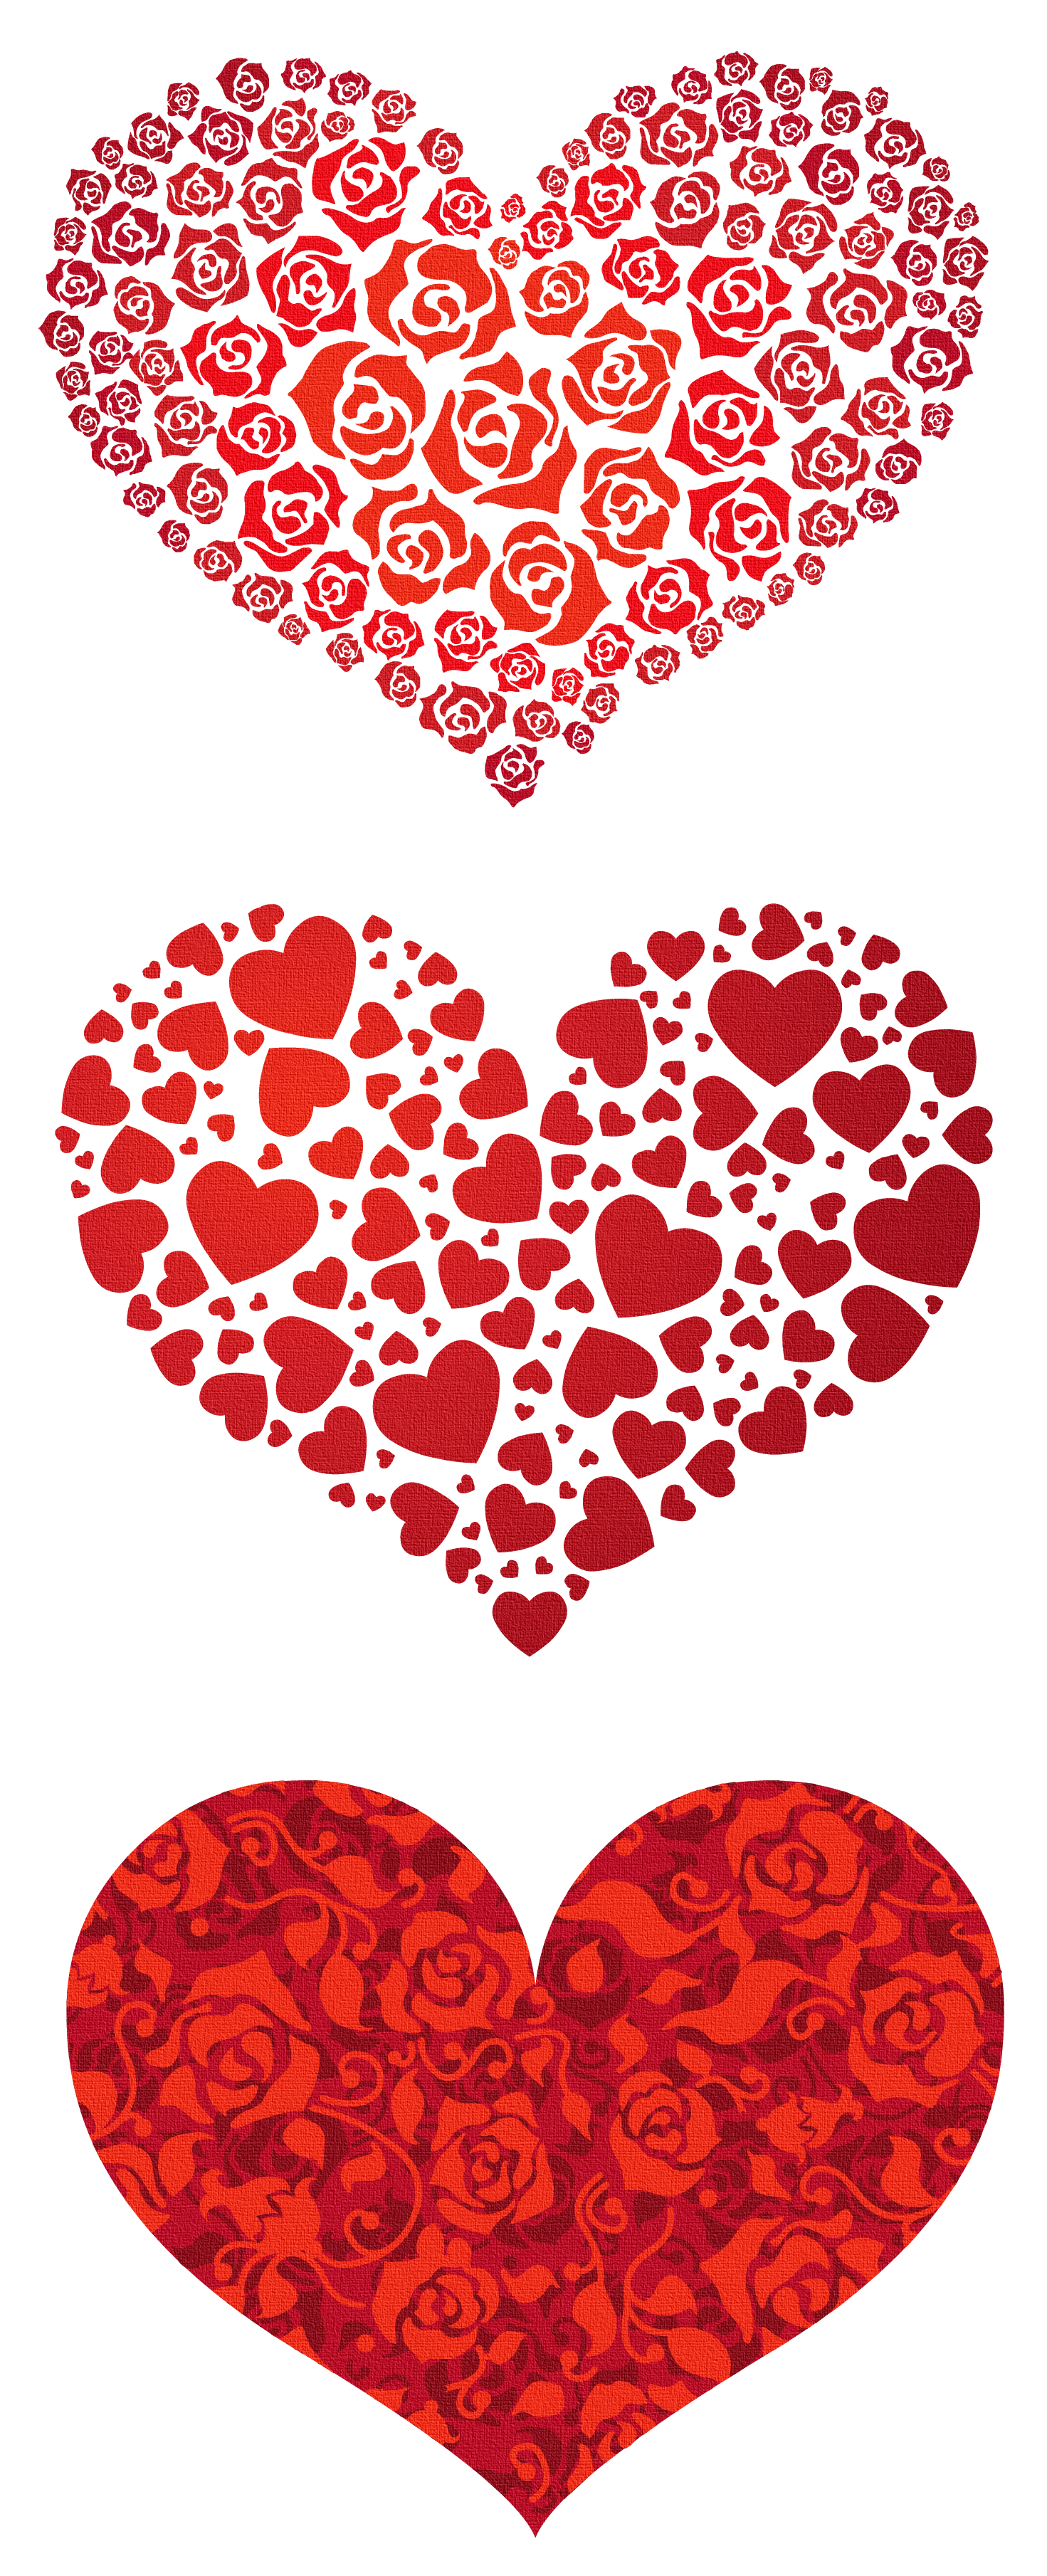 Red Hearts Transparent Graphics Clipart | Gallery Yopriceville - High-Quality Images and ...